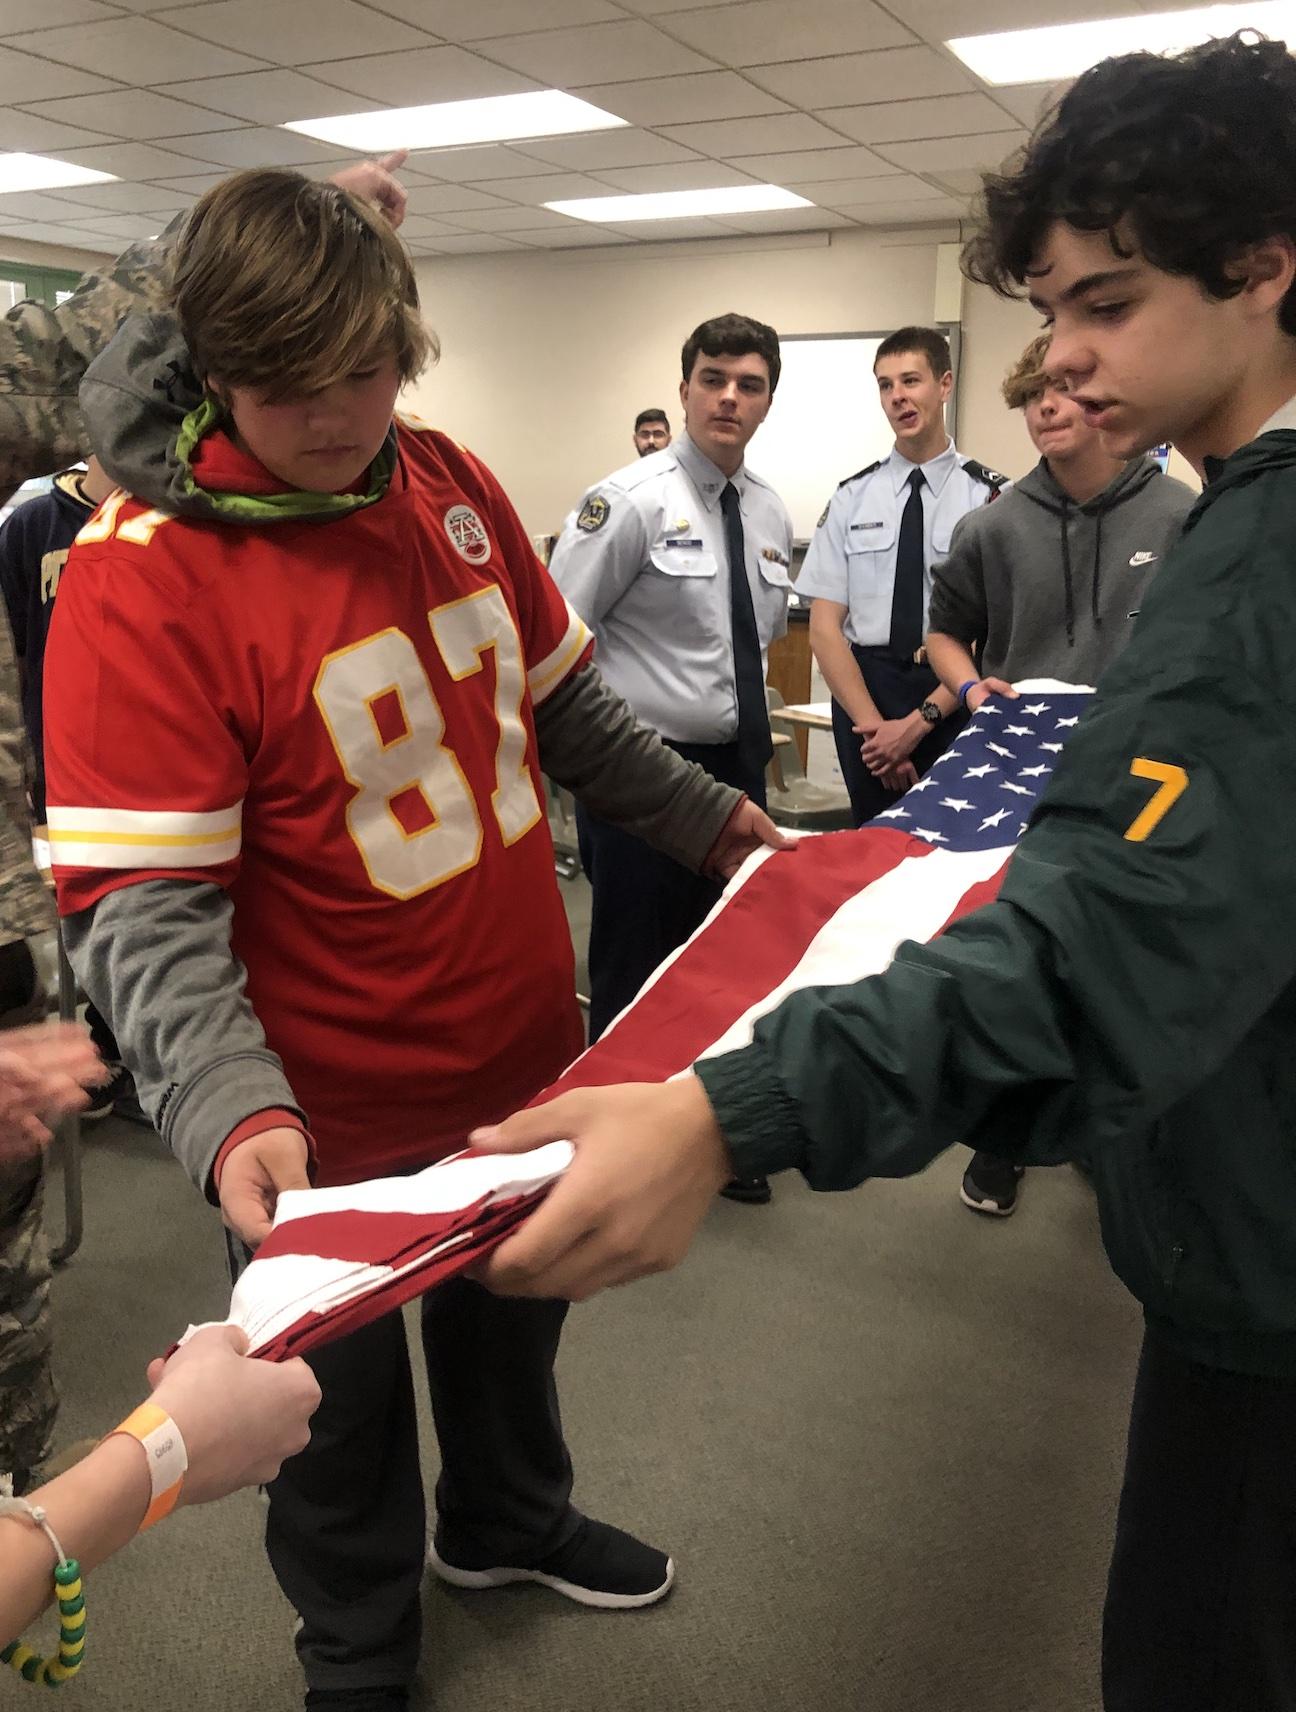 8th-graders Max Skaritka and Trey Muhitch practice folding the flag